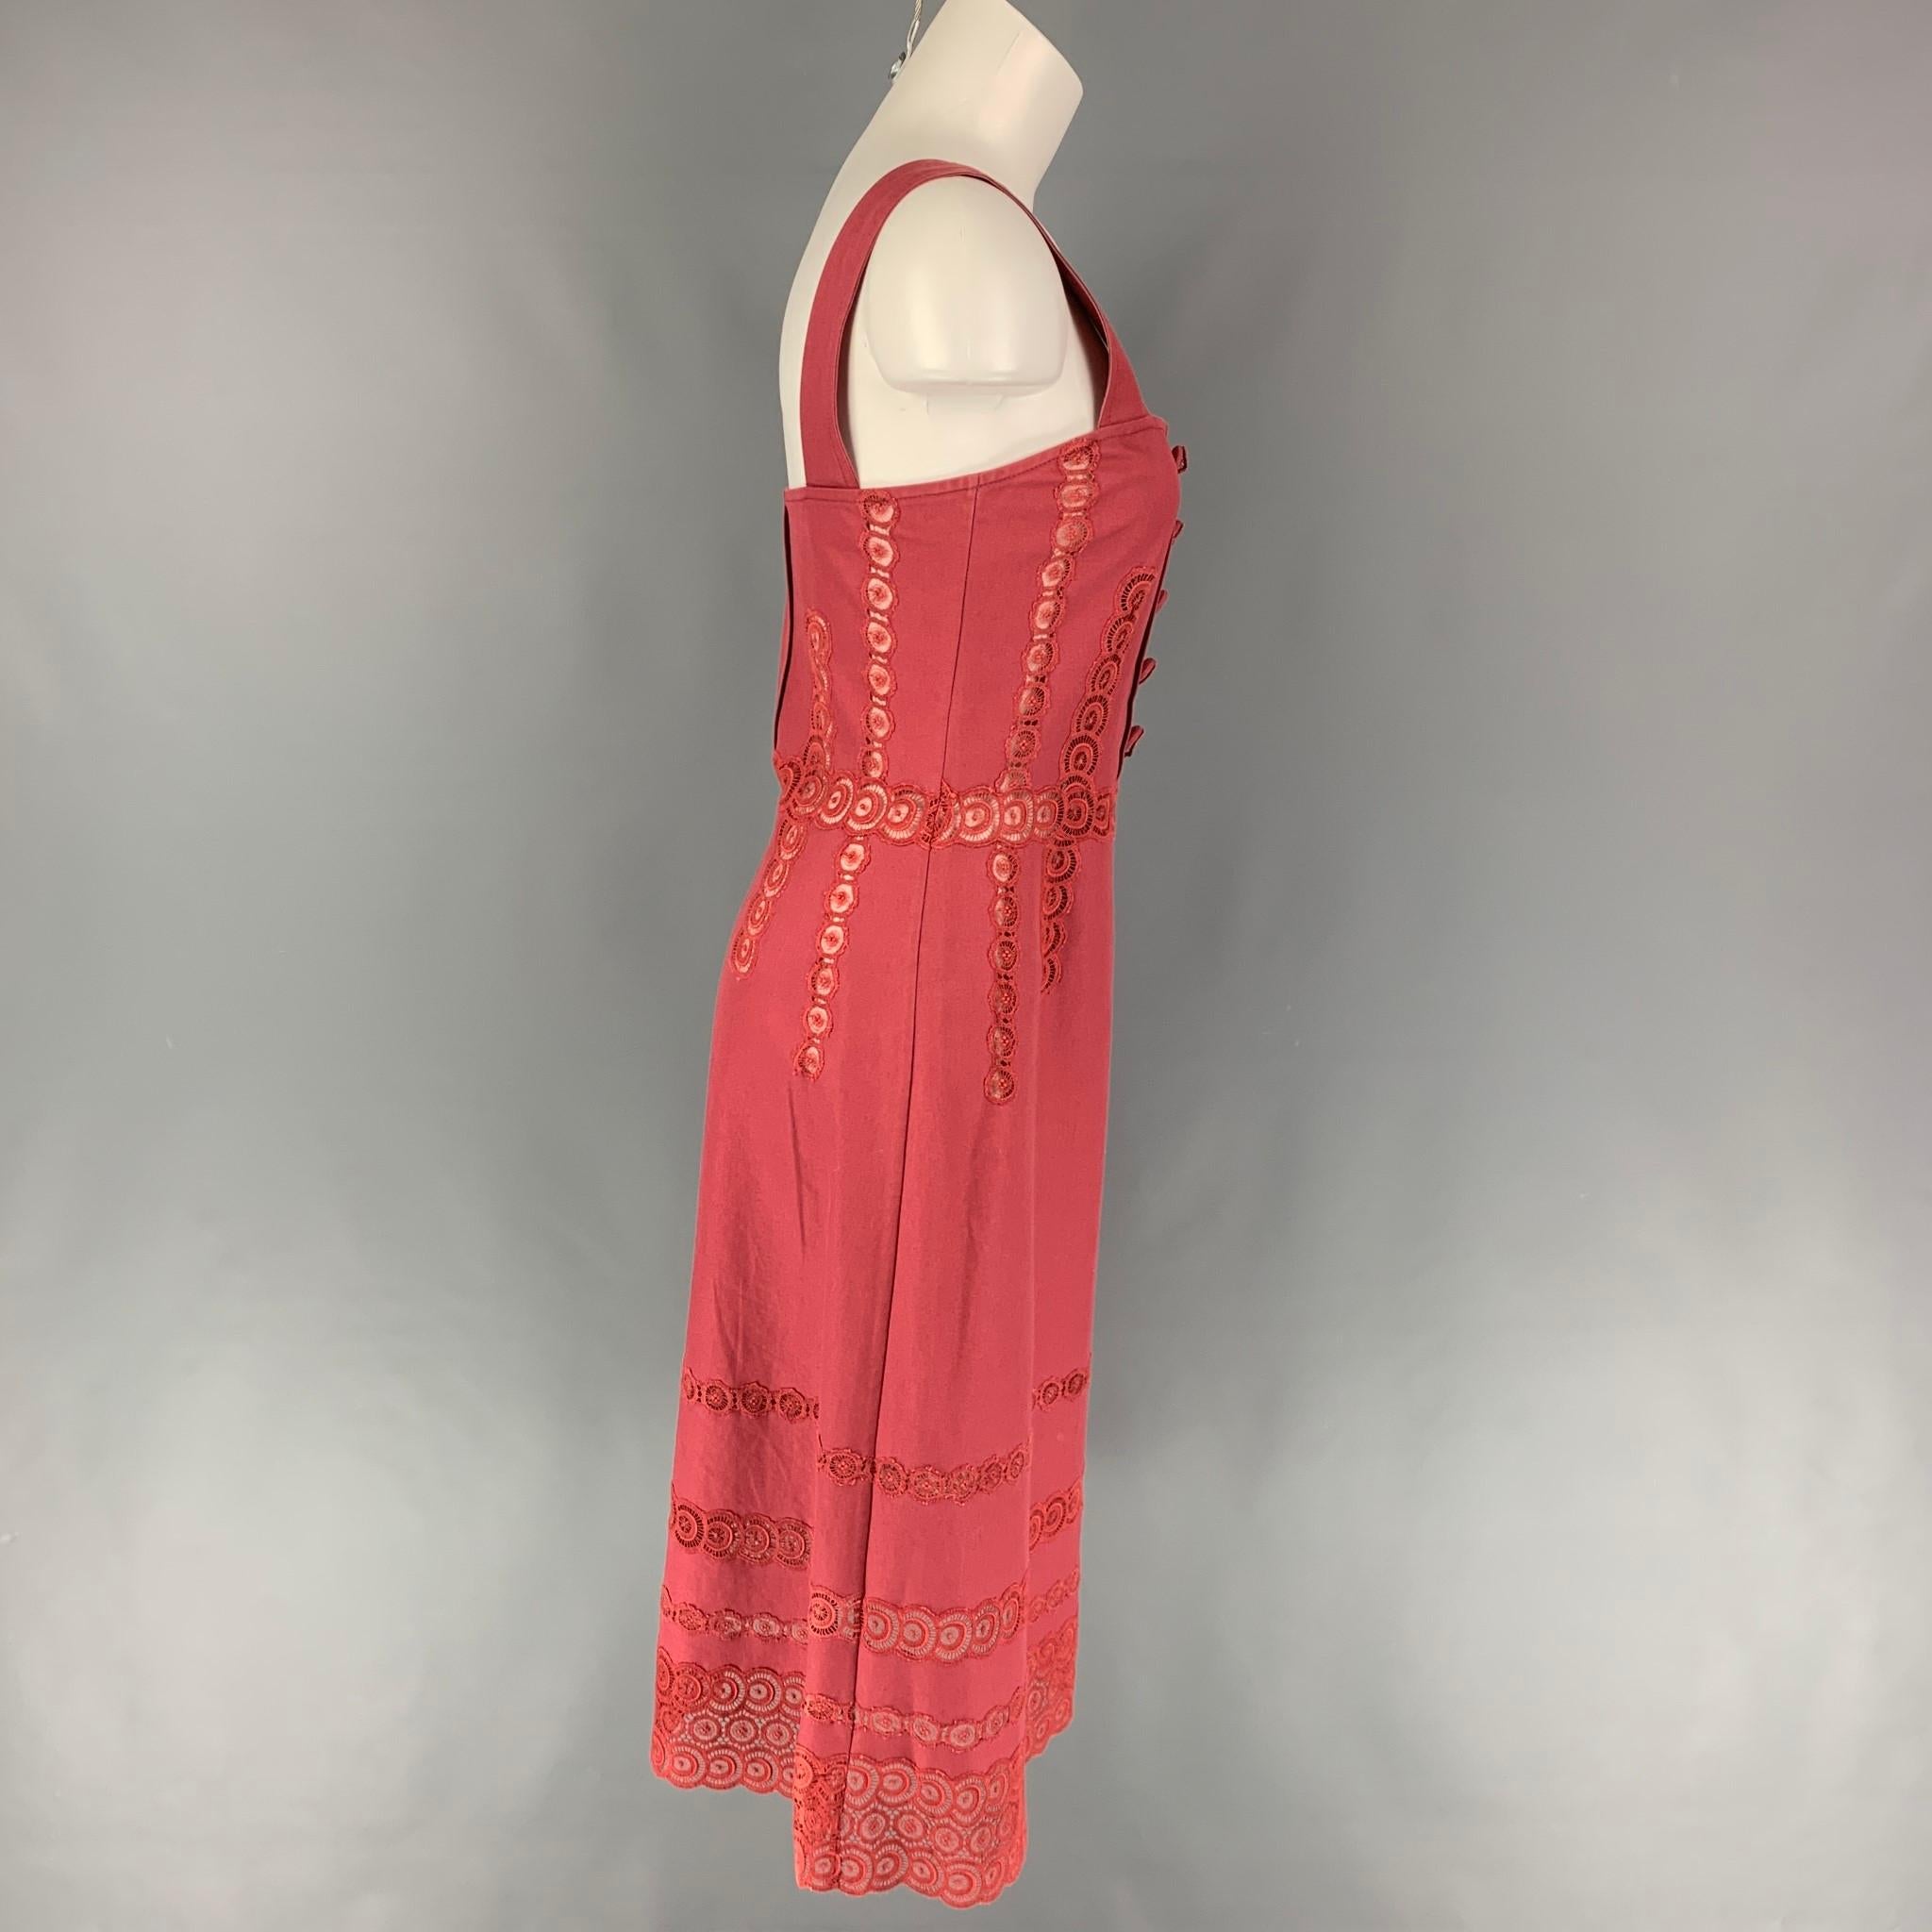 MARC JACOBS dress comes in a raspberry cotton featuring eyelet details, a-line style, front button details, and a side zipper closure. 

Very Good Pre-Owned Condition.
Marked: 6

Measurements:

Bust: 31 in.
Waist: 29 in.
Hip: 36 in.
Length: 35 in. 